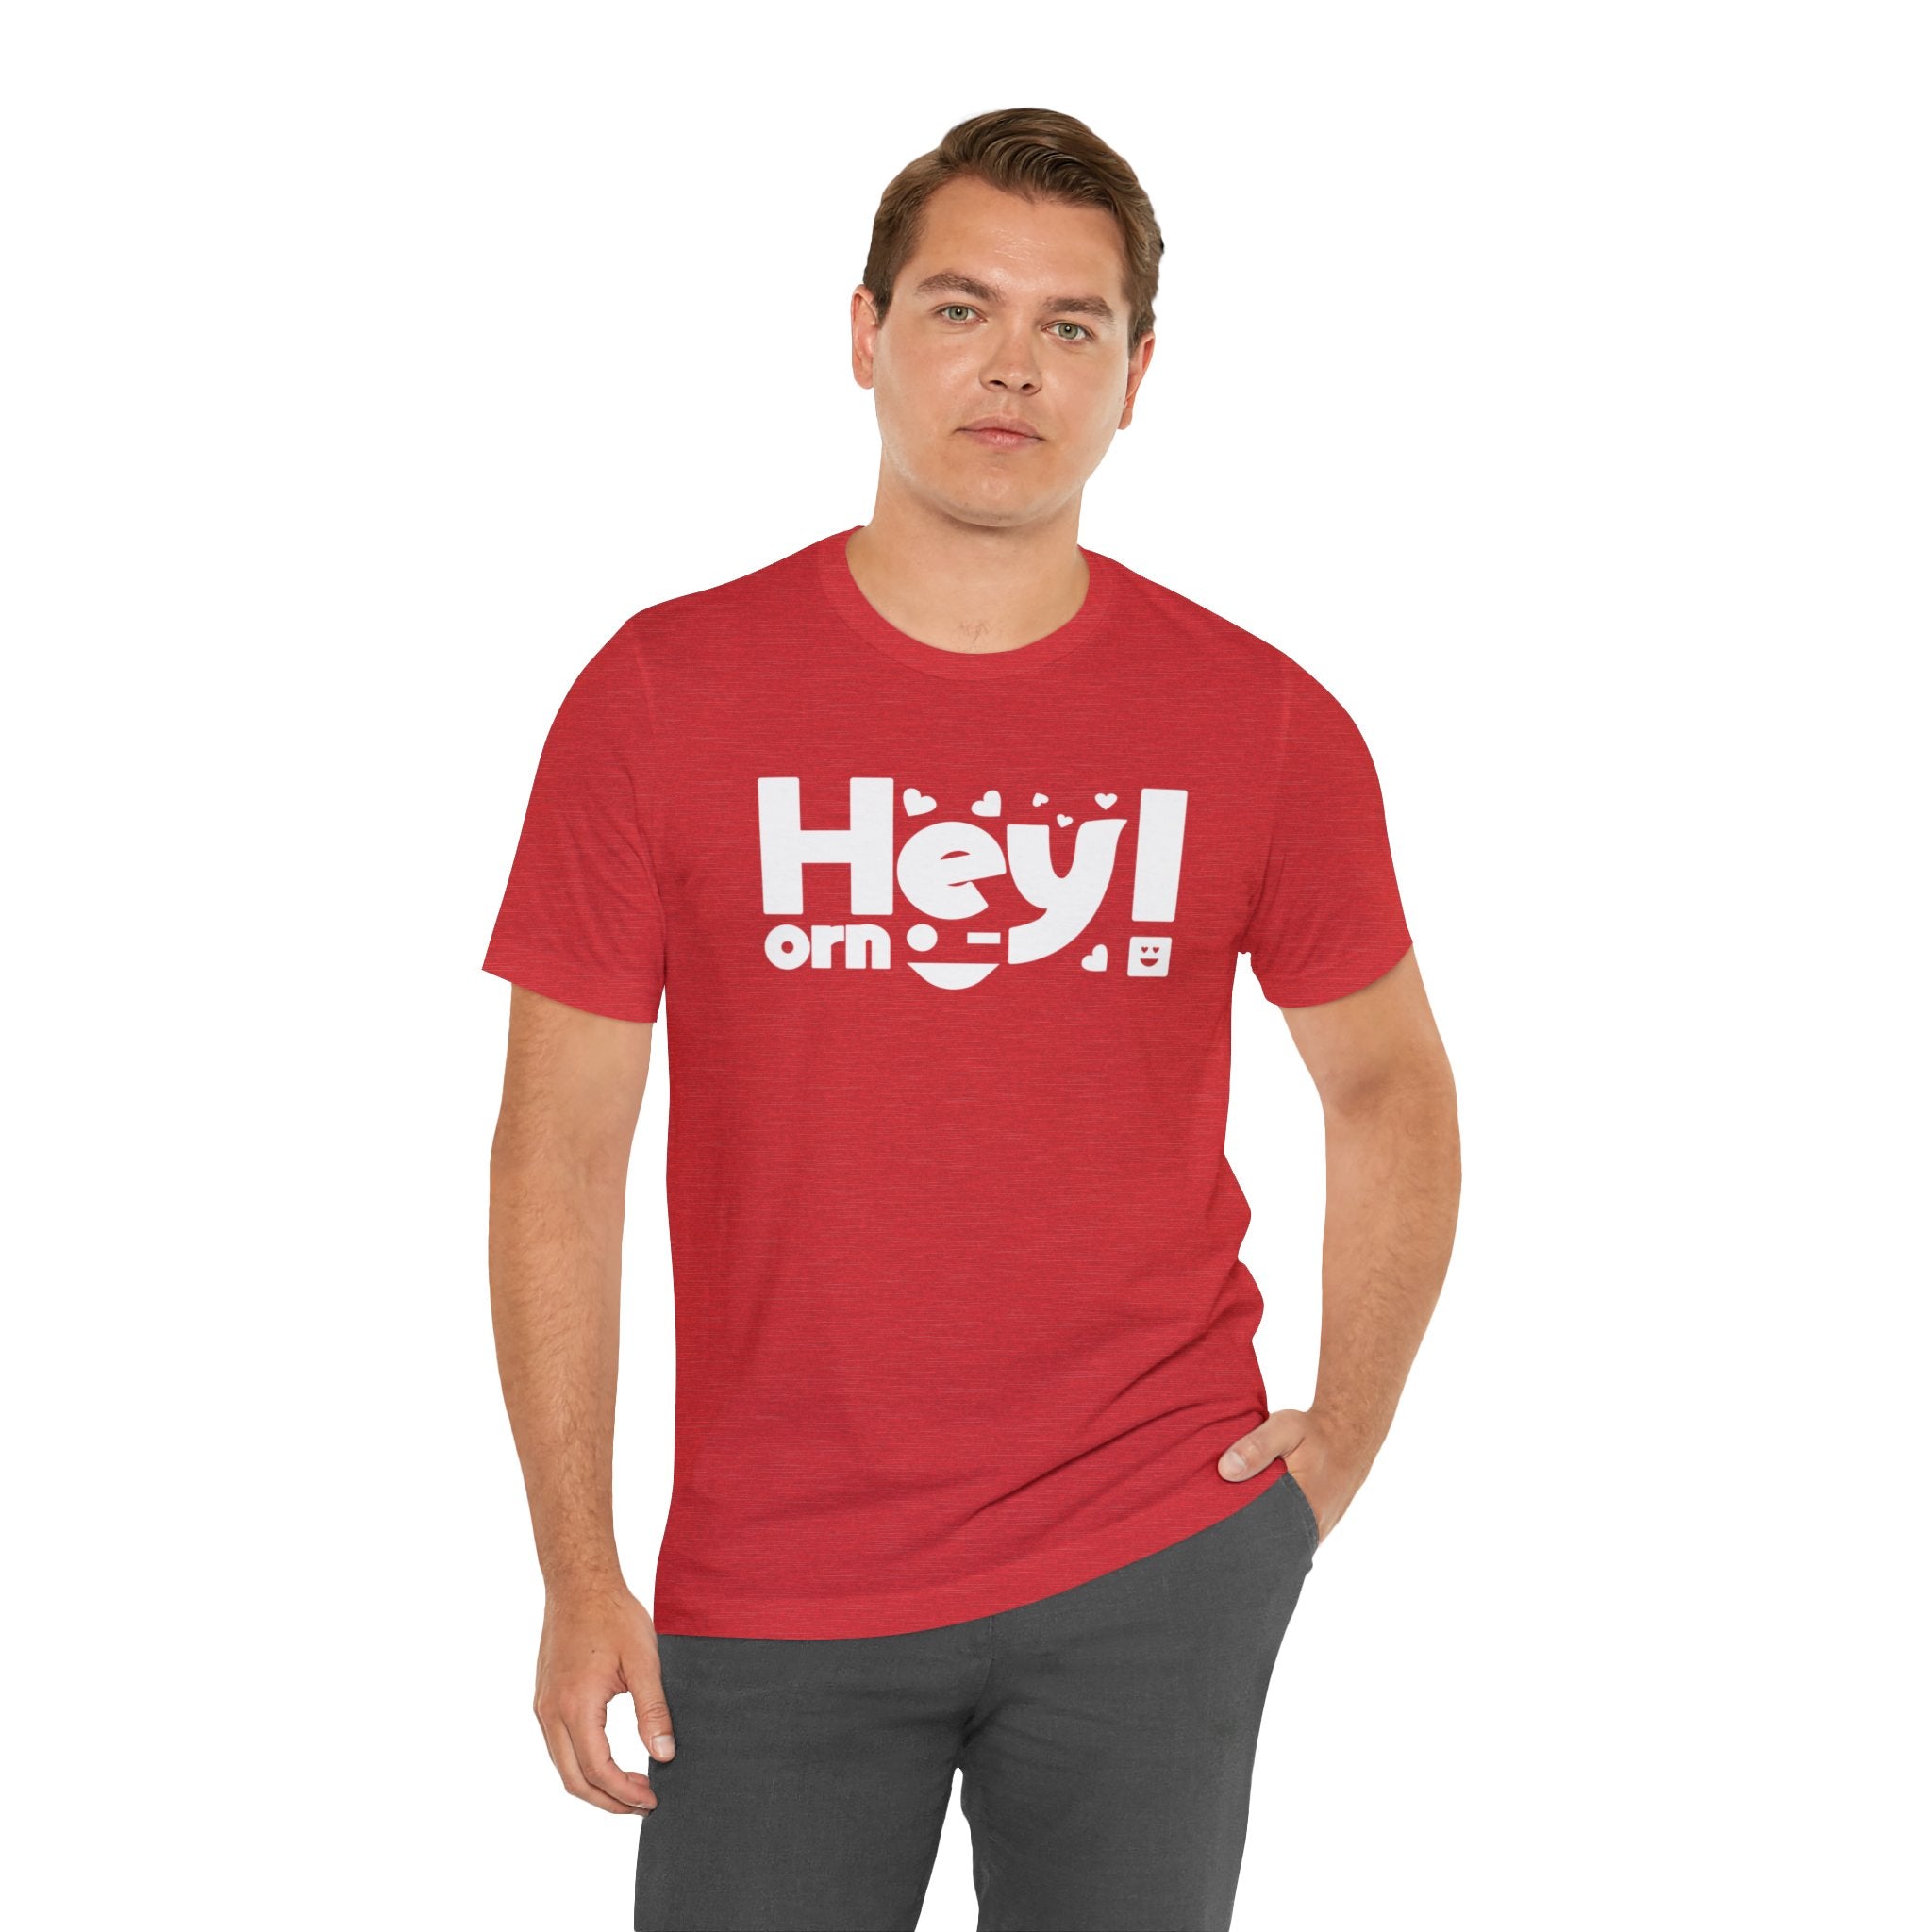 A man in a Hey-rny T Shirt makes a fashion statement.